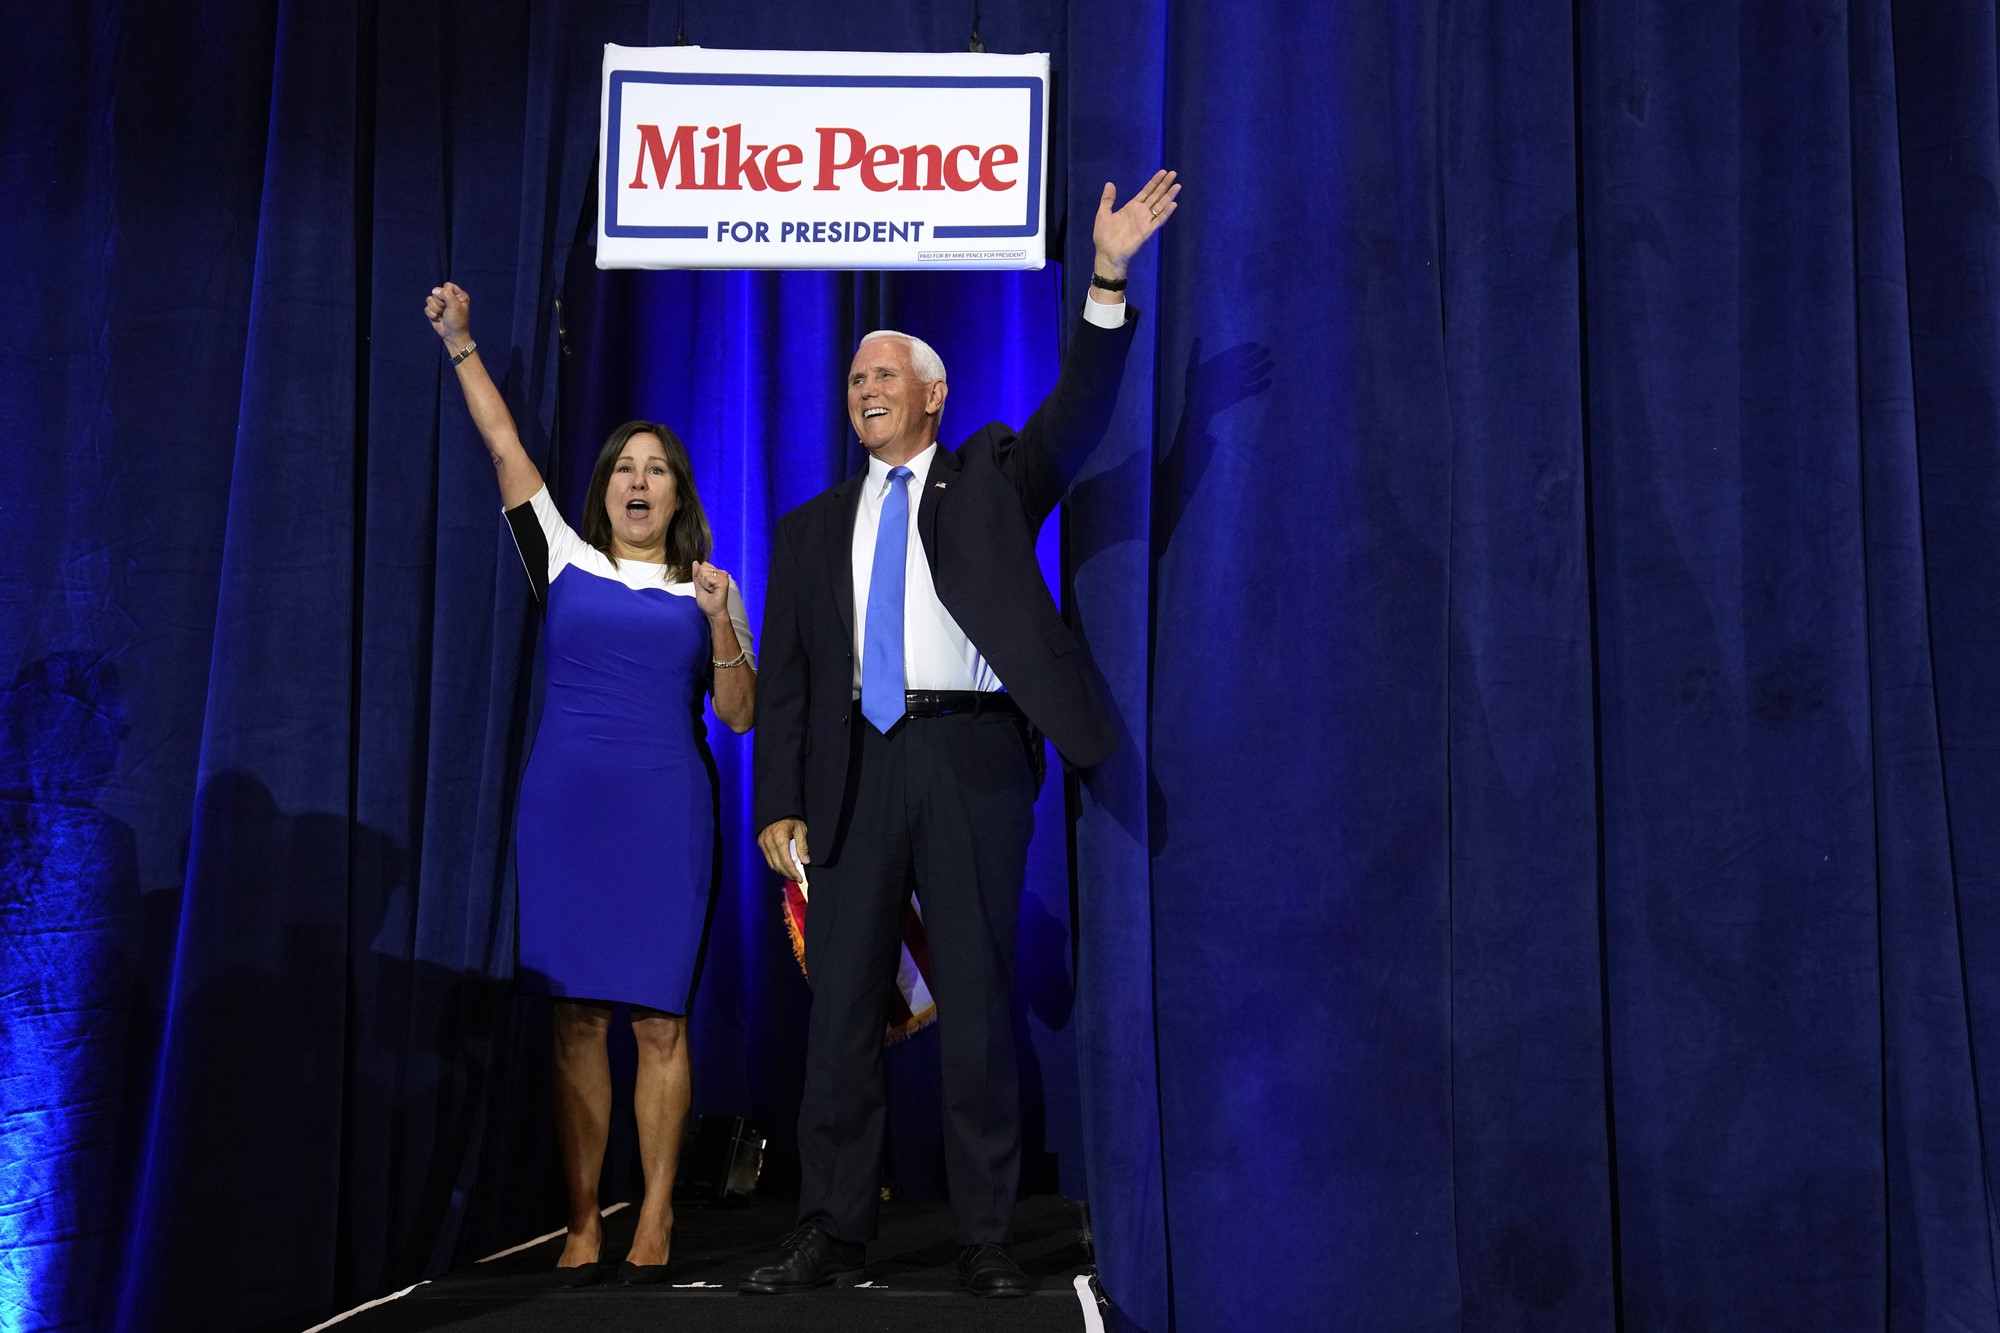 A white man stands in a suit wearing a blue tie, next to a woman in a blue dress with their hands in the air.